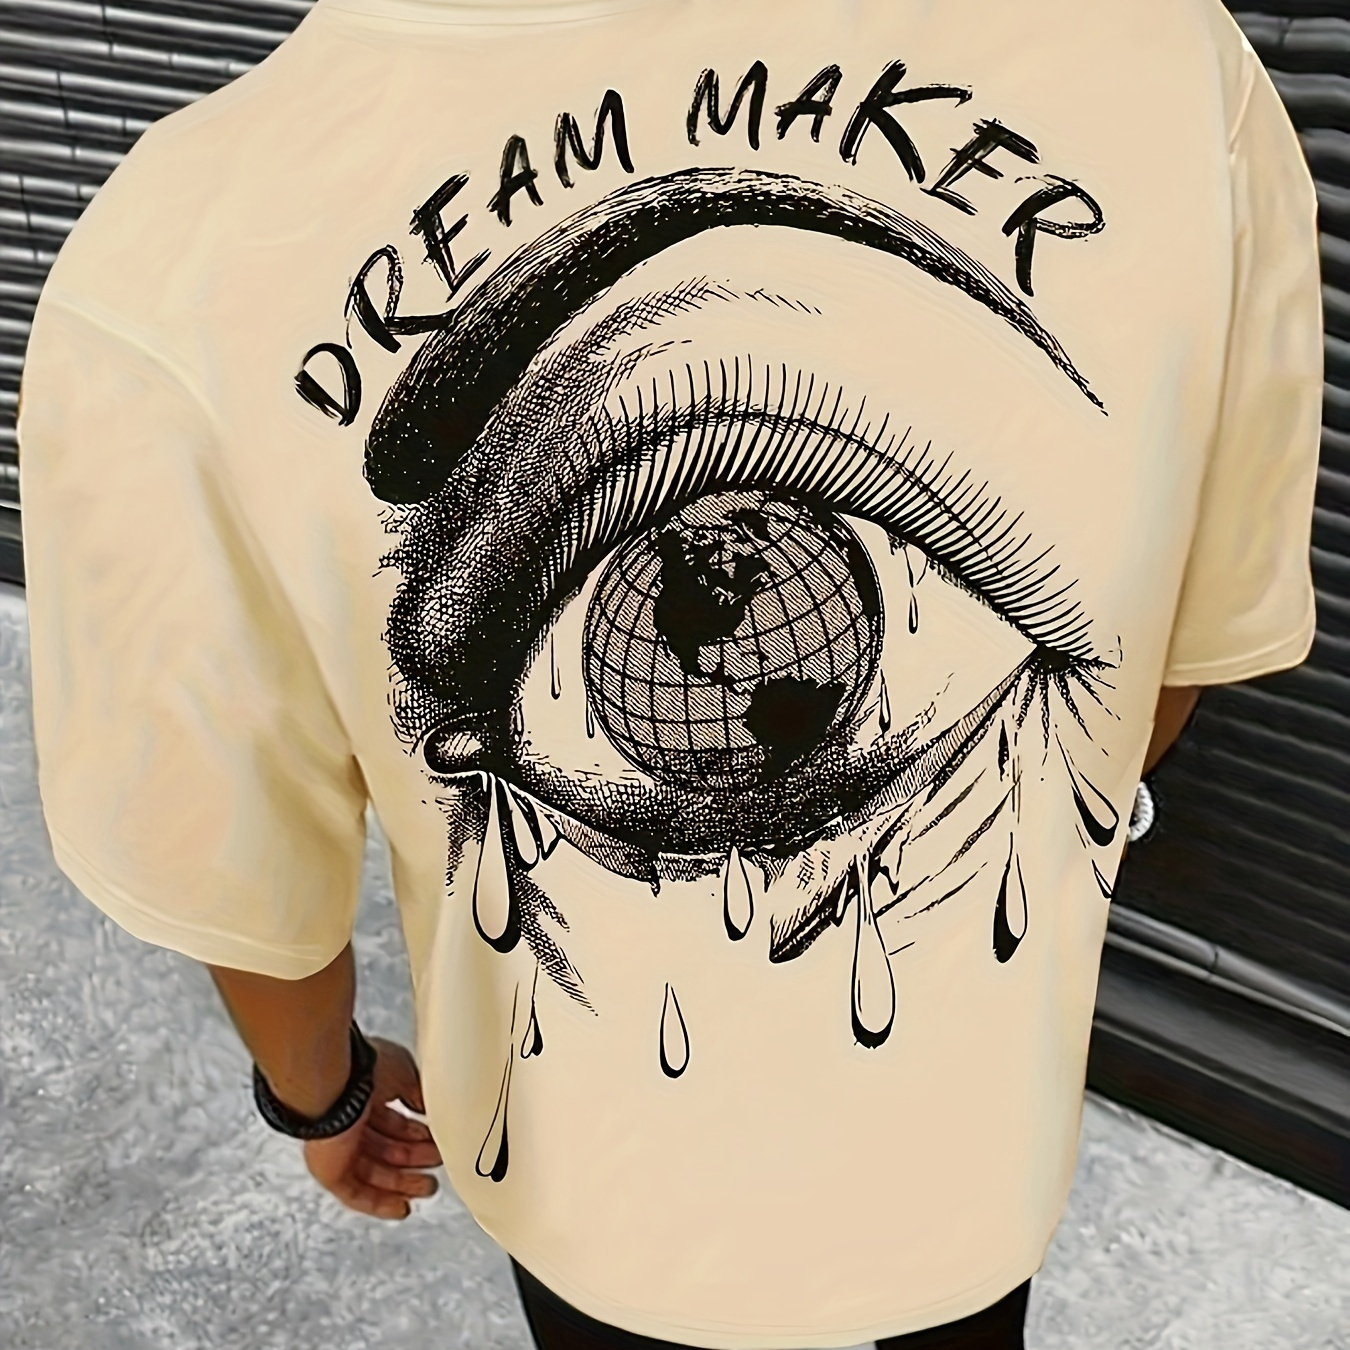 

Crying Eye Pattern And Letter Print "dream Maker" Crew Neck And Short Sleeve T-shirt, Chic And Trendy Tops For Men's Summer Street Wear